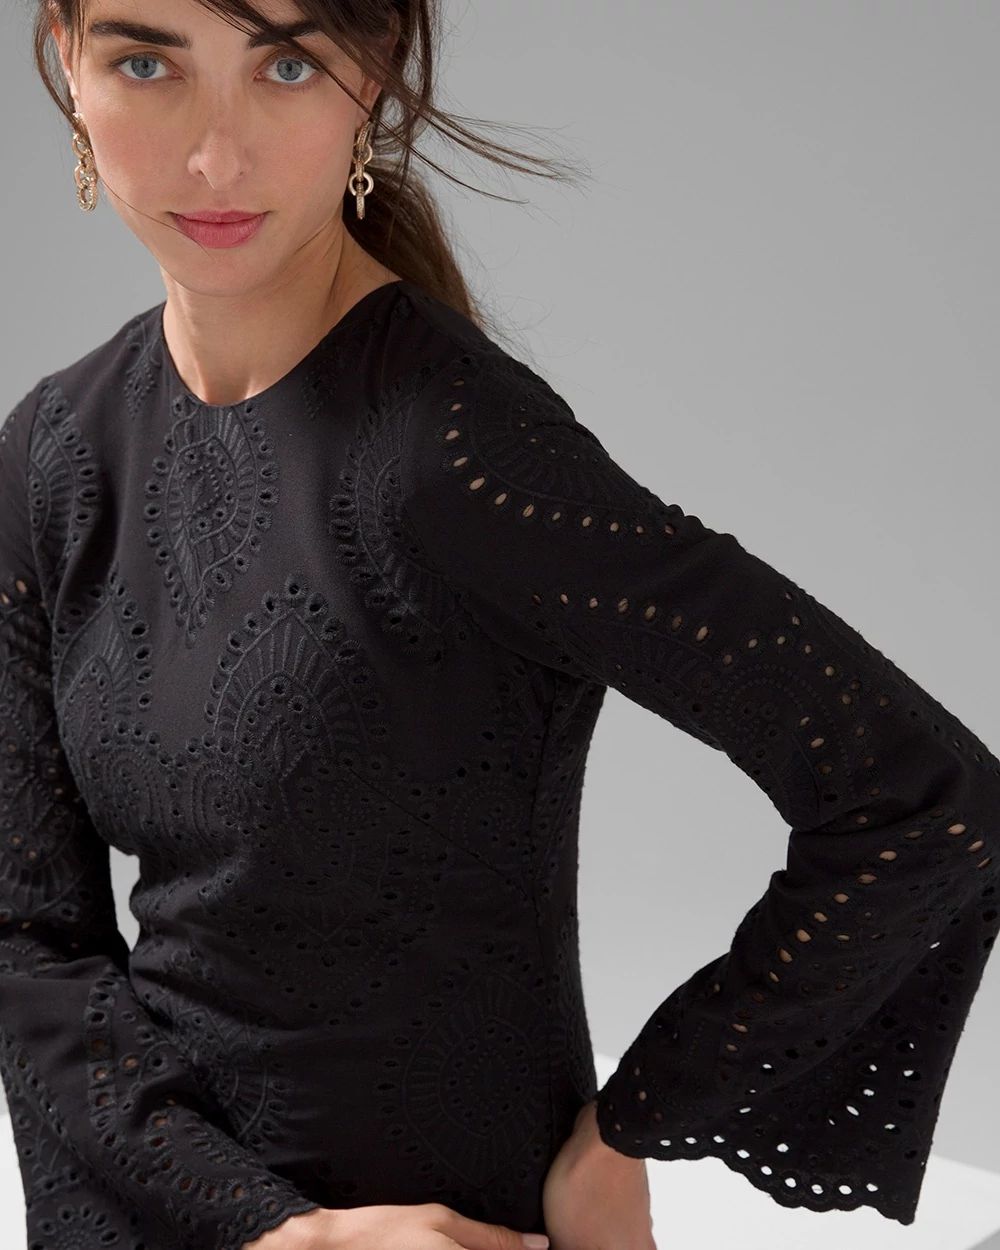 Petite Long-Sleeve Eyelet Shift Dress click to view larger image.